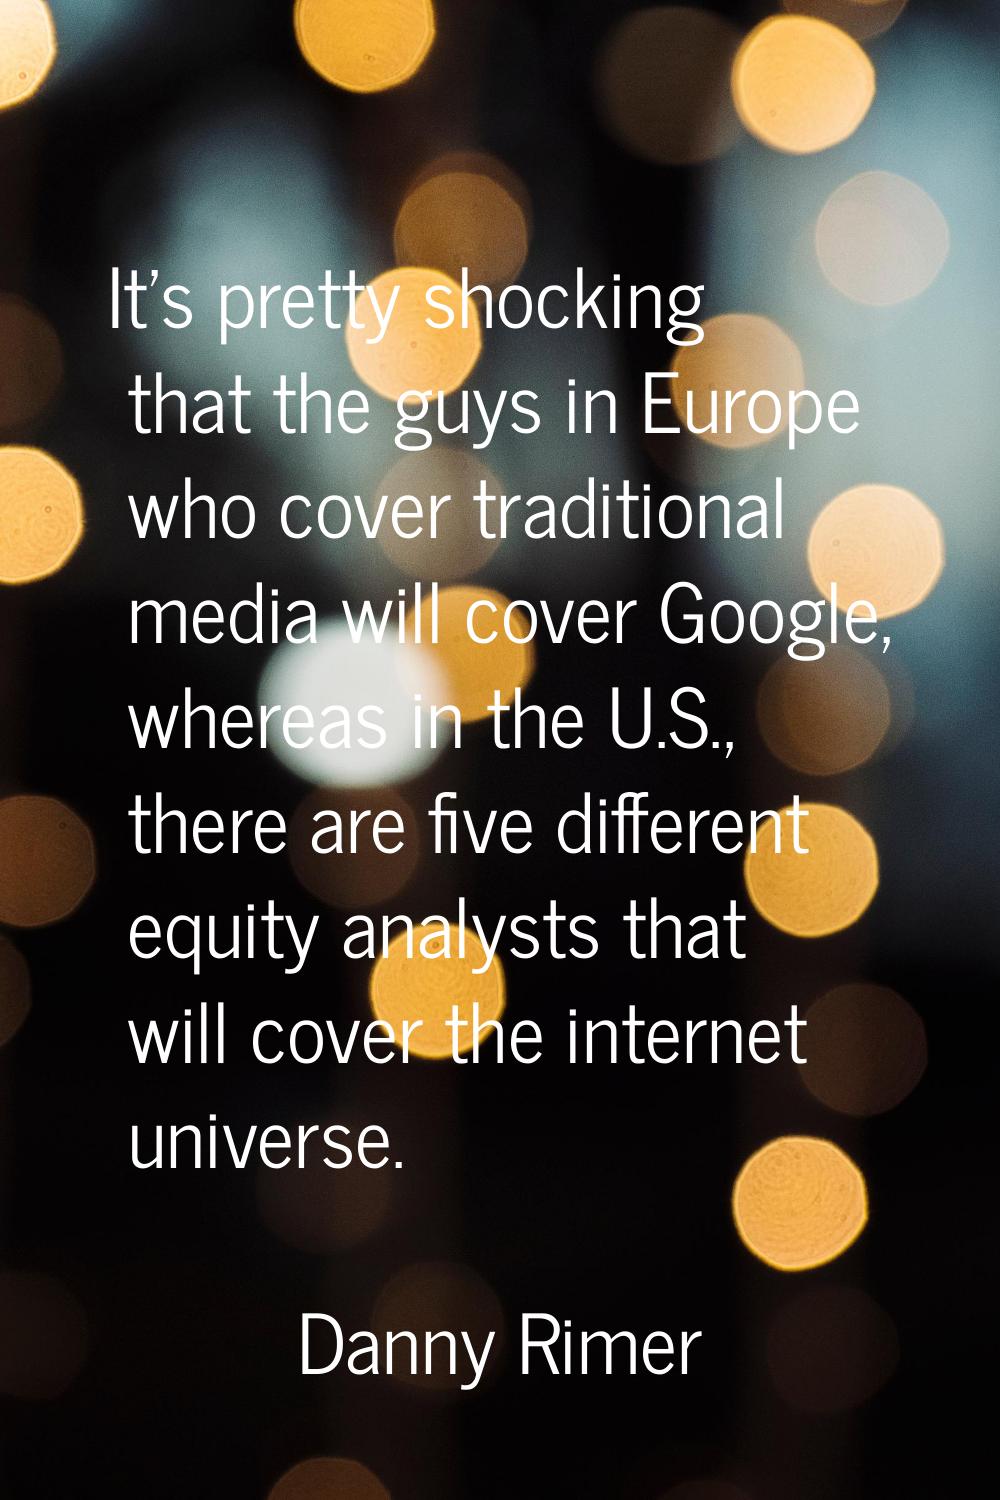 It's pretty shocking that the guys in Europe who cover traditional media will cover Google, whereas